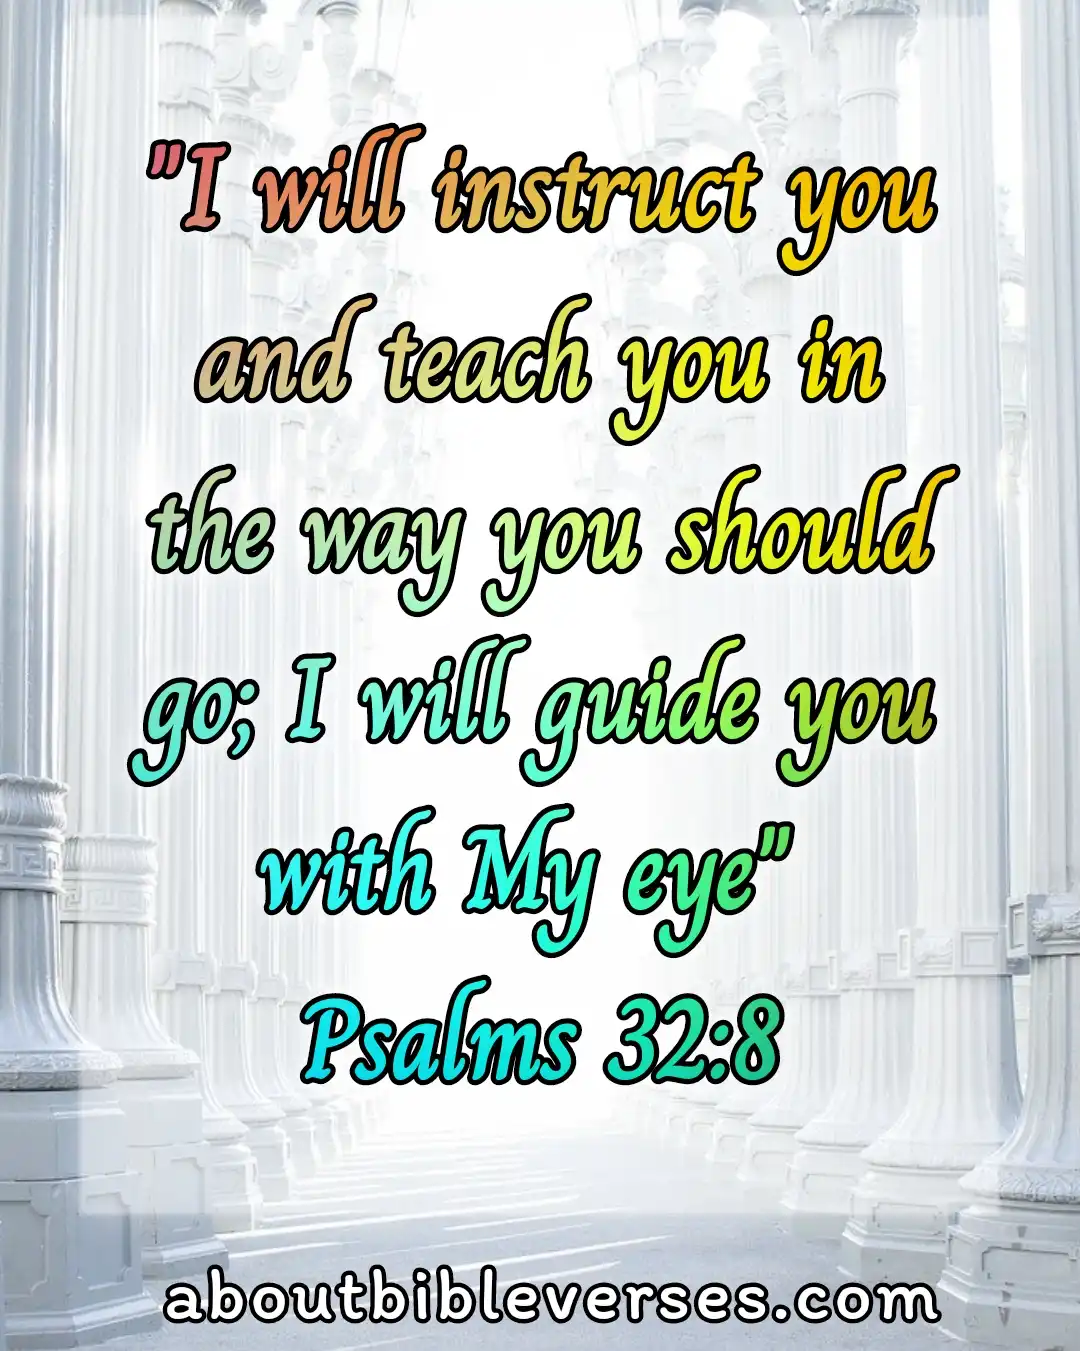 today bible verse (Psalm 32:8)